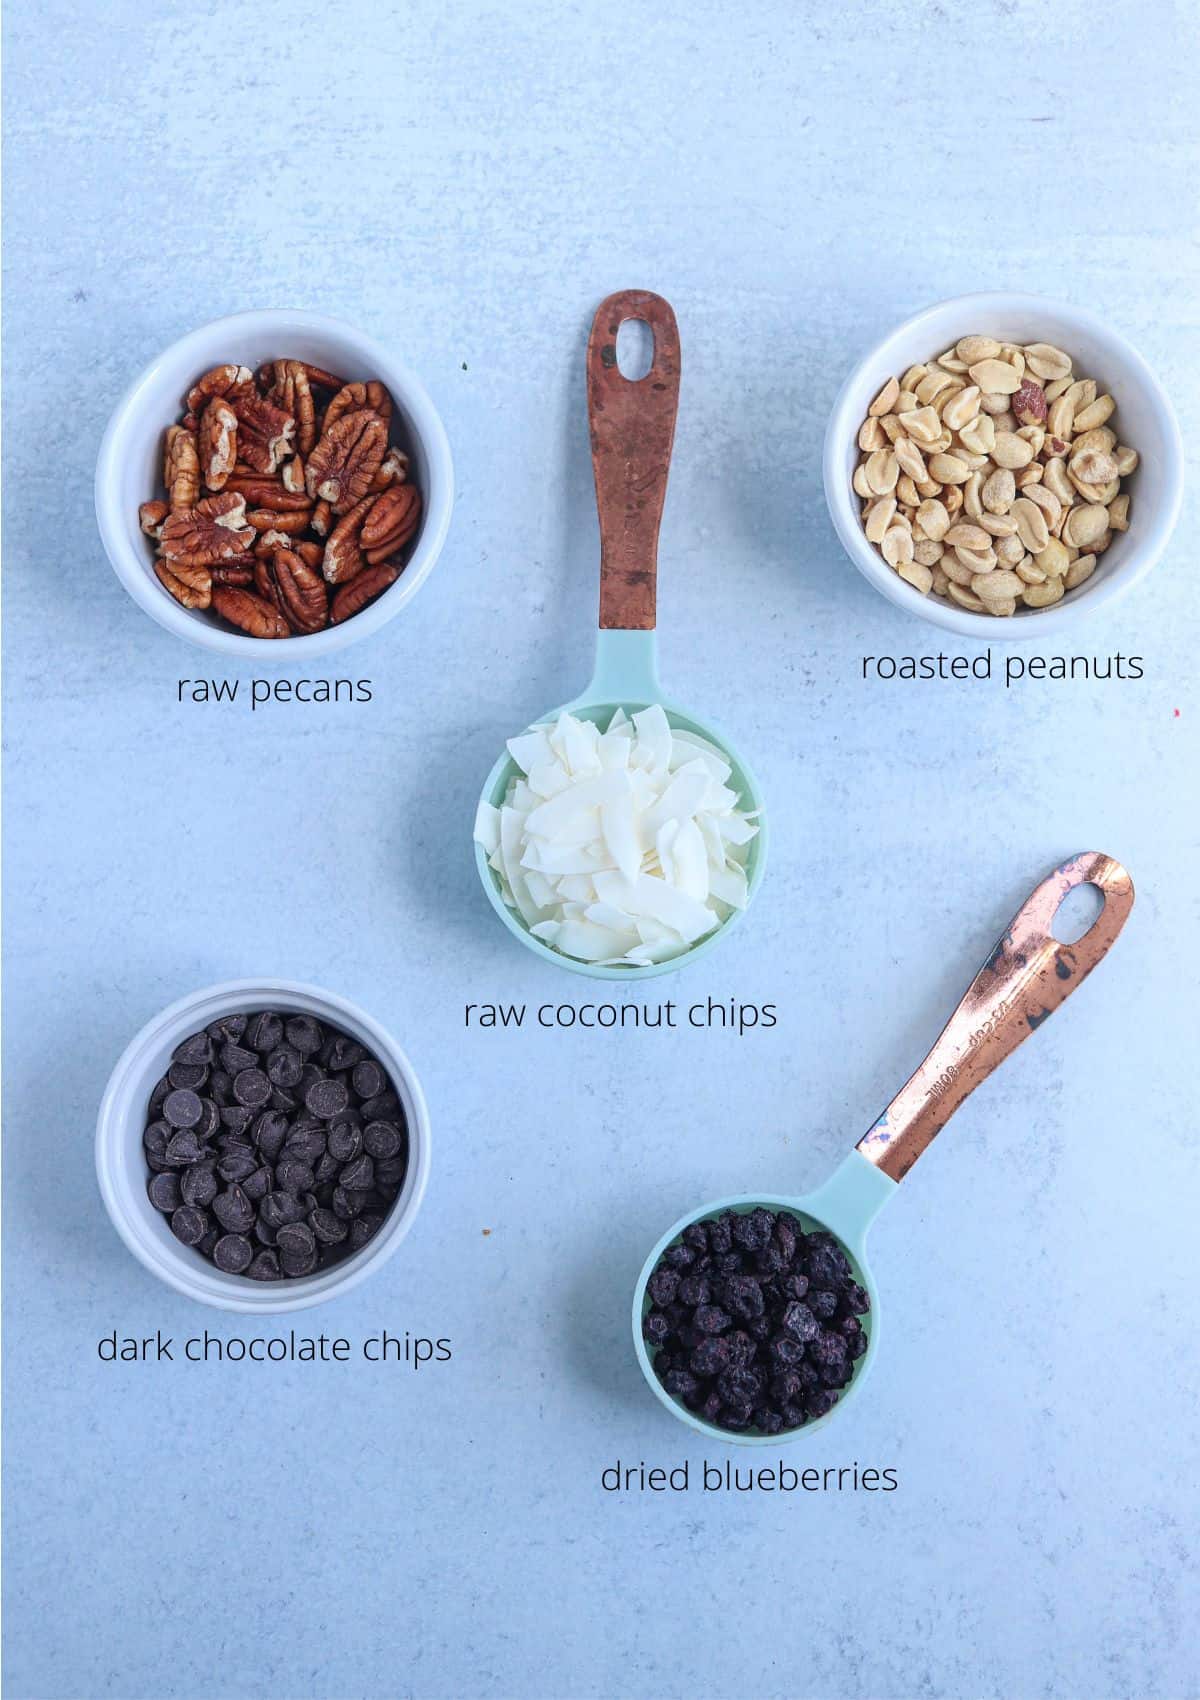 low carb trail mix ingredients in small containers on a gray surface.